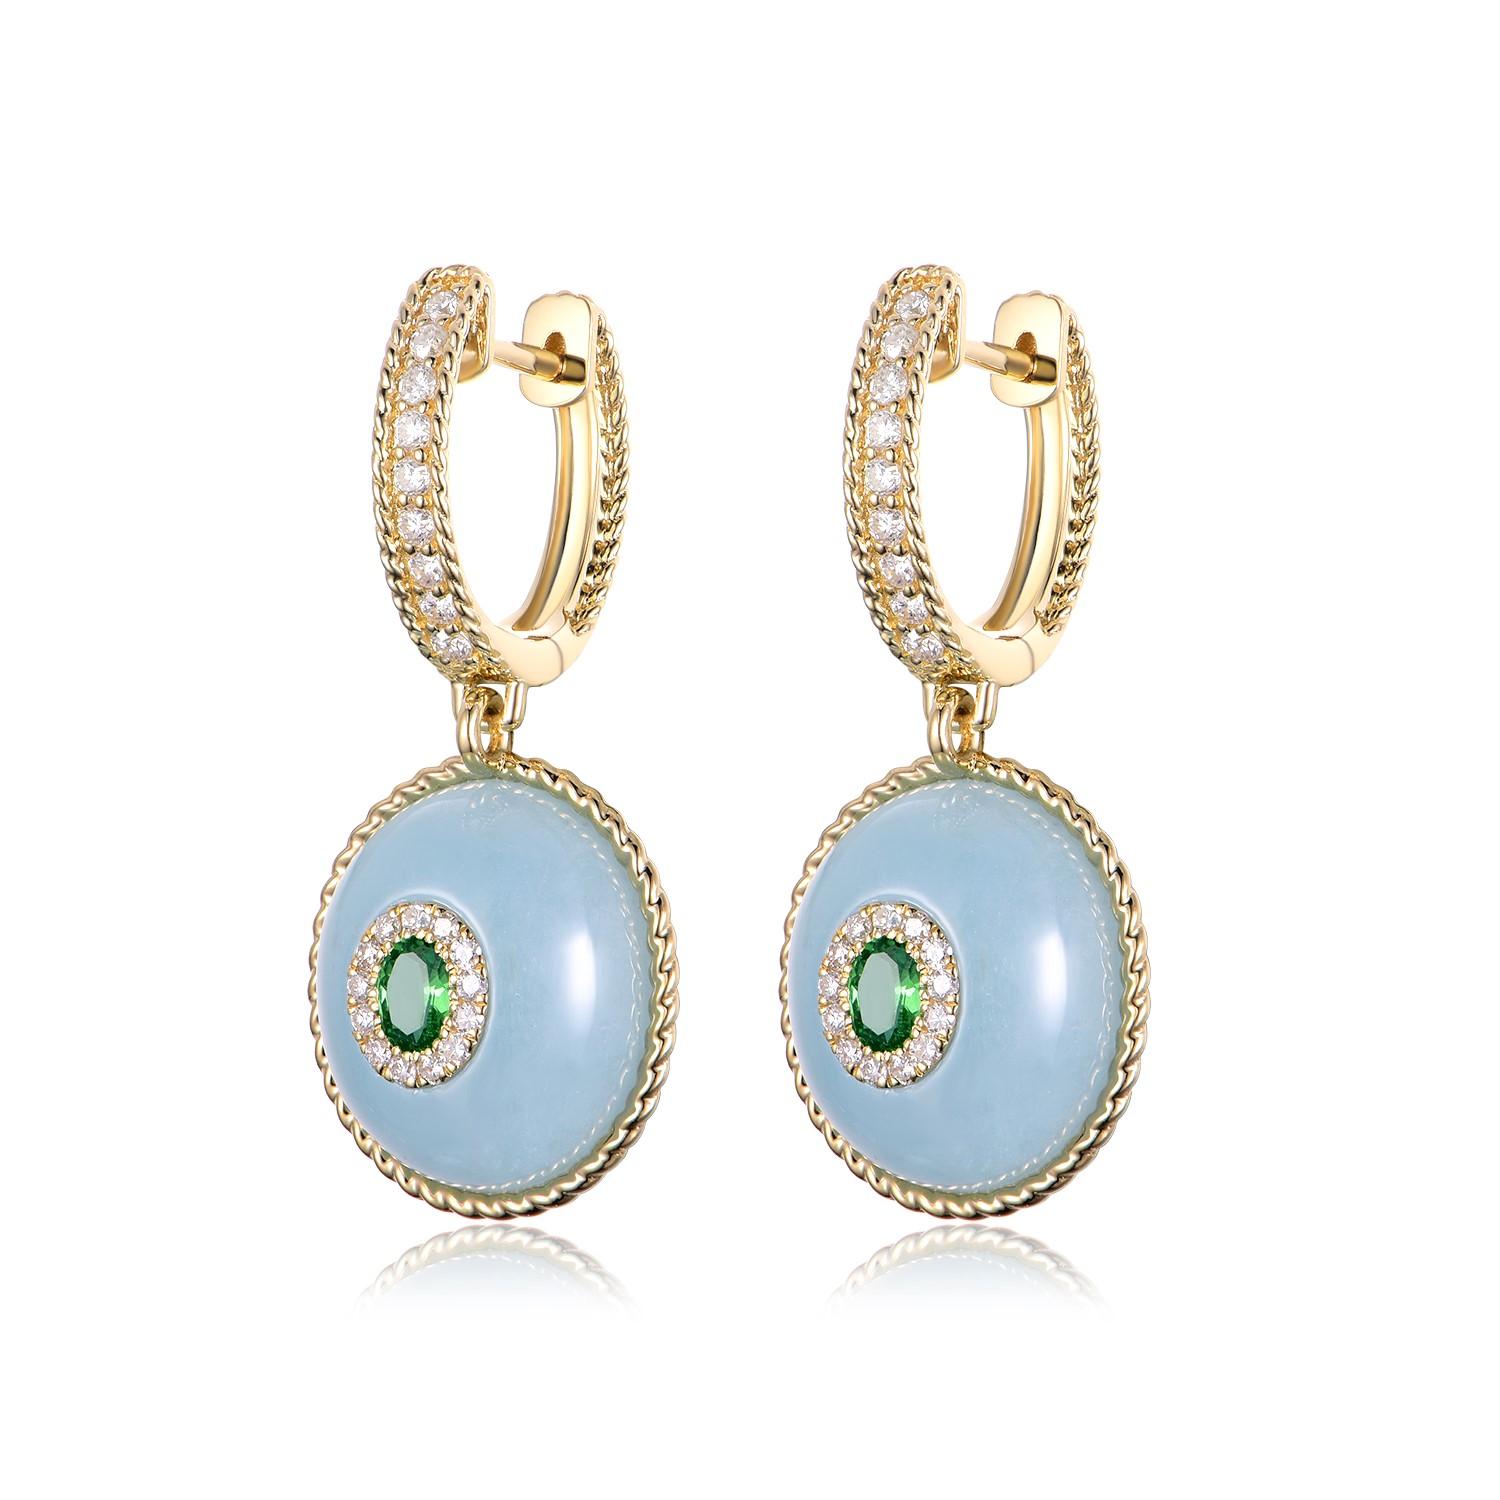 Presented here is a pair of luxurious earrings, each crafted in 14K yellow gold, that exude sophistication and a timeless sense of style. The earrings are adorned with a pair of remarkable 18.19 carats of aquamarine, a gemstone cherished for its